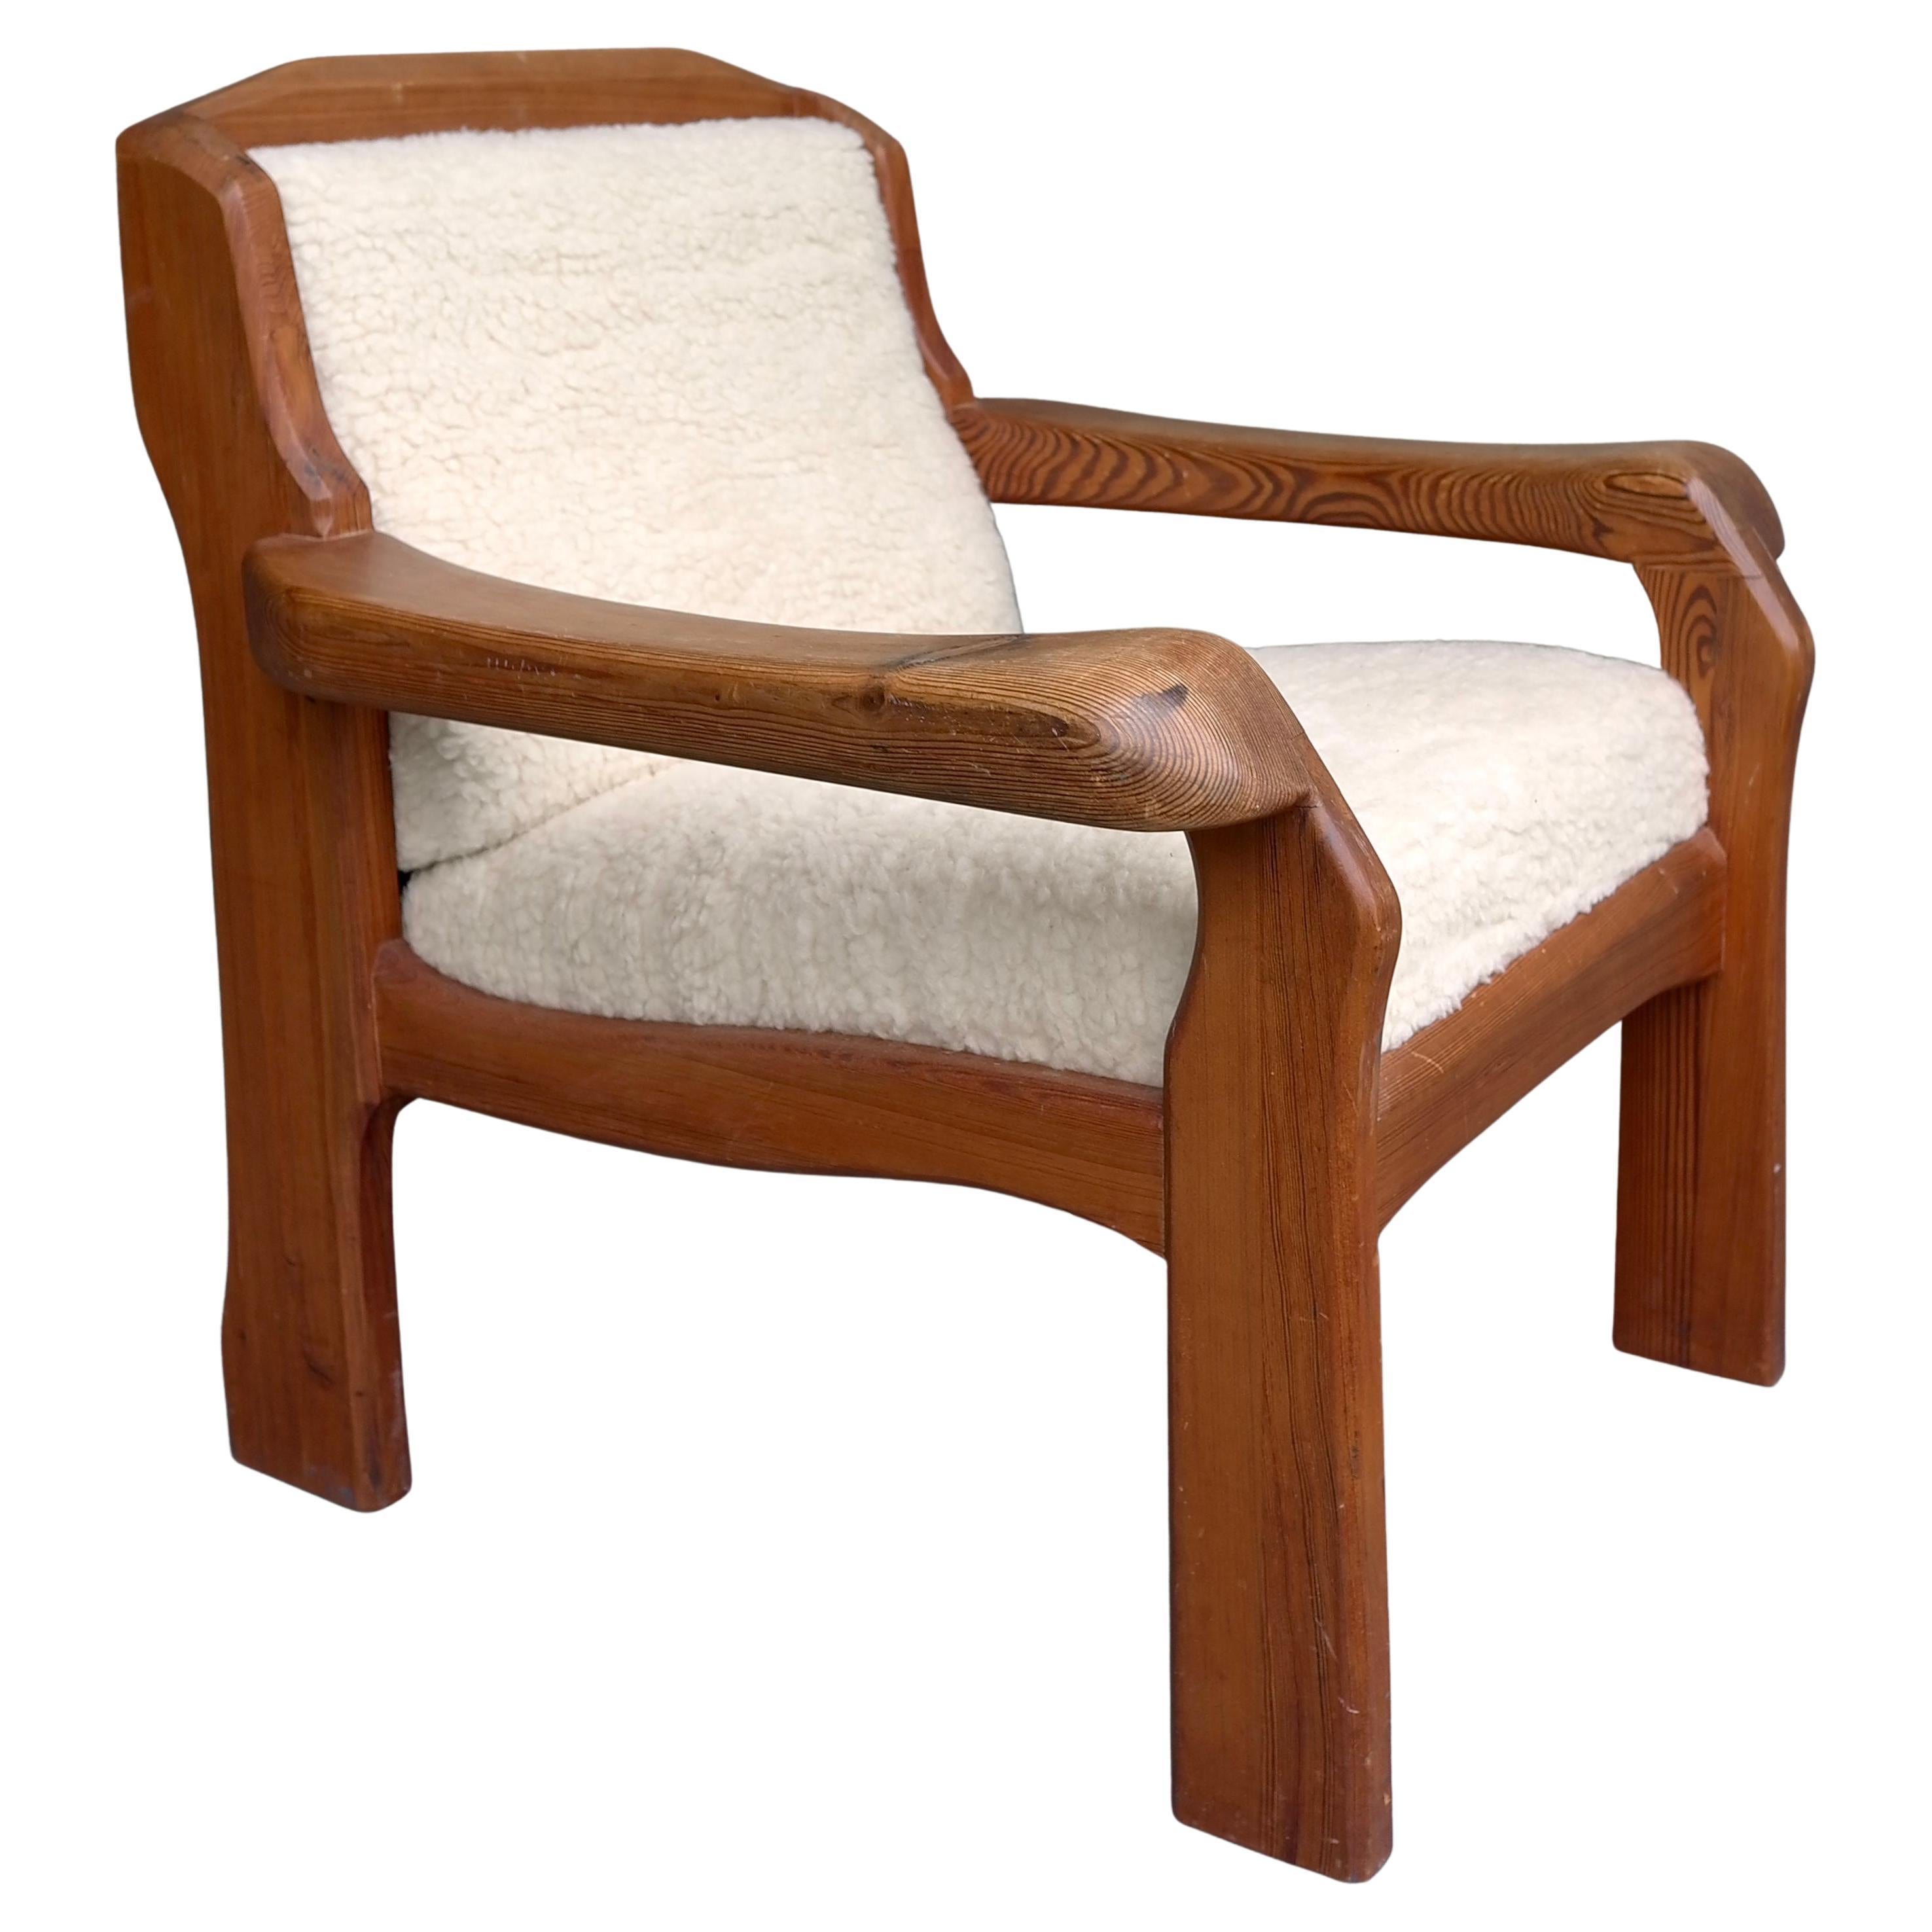 Organic anthroposophical Pine Lounge Chair, pure Merino Wool Upholstery, 1960' For Sale